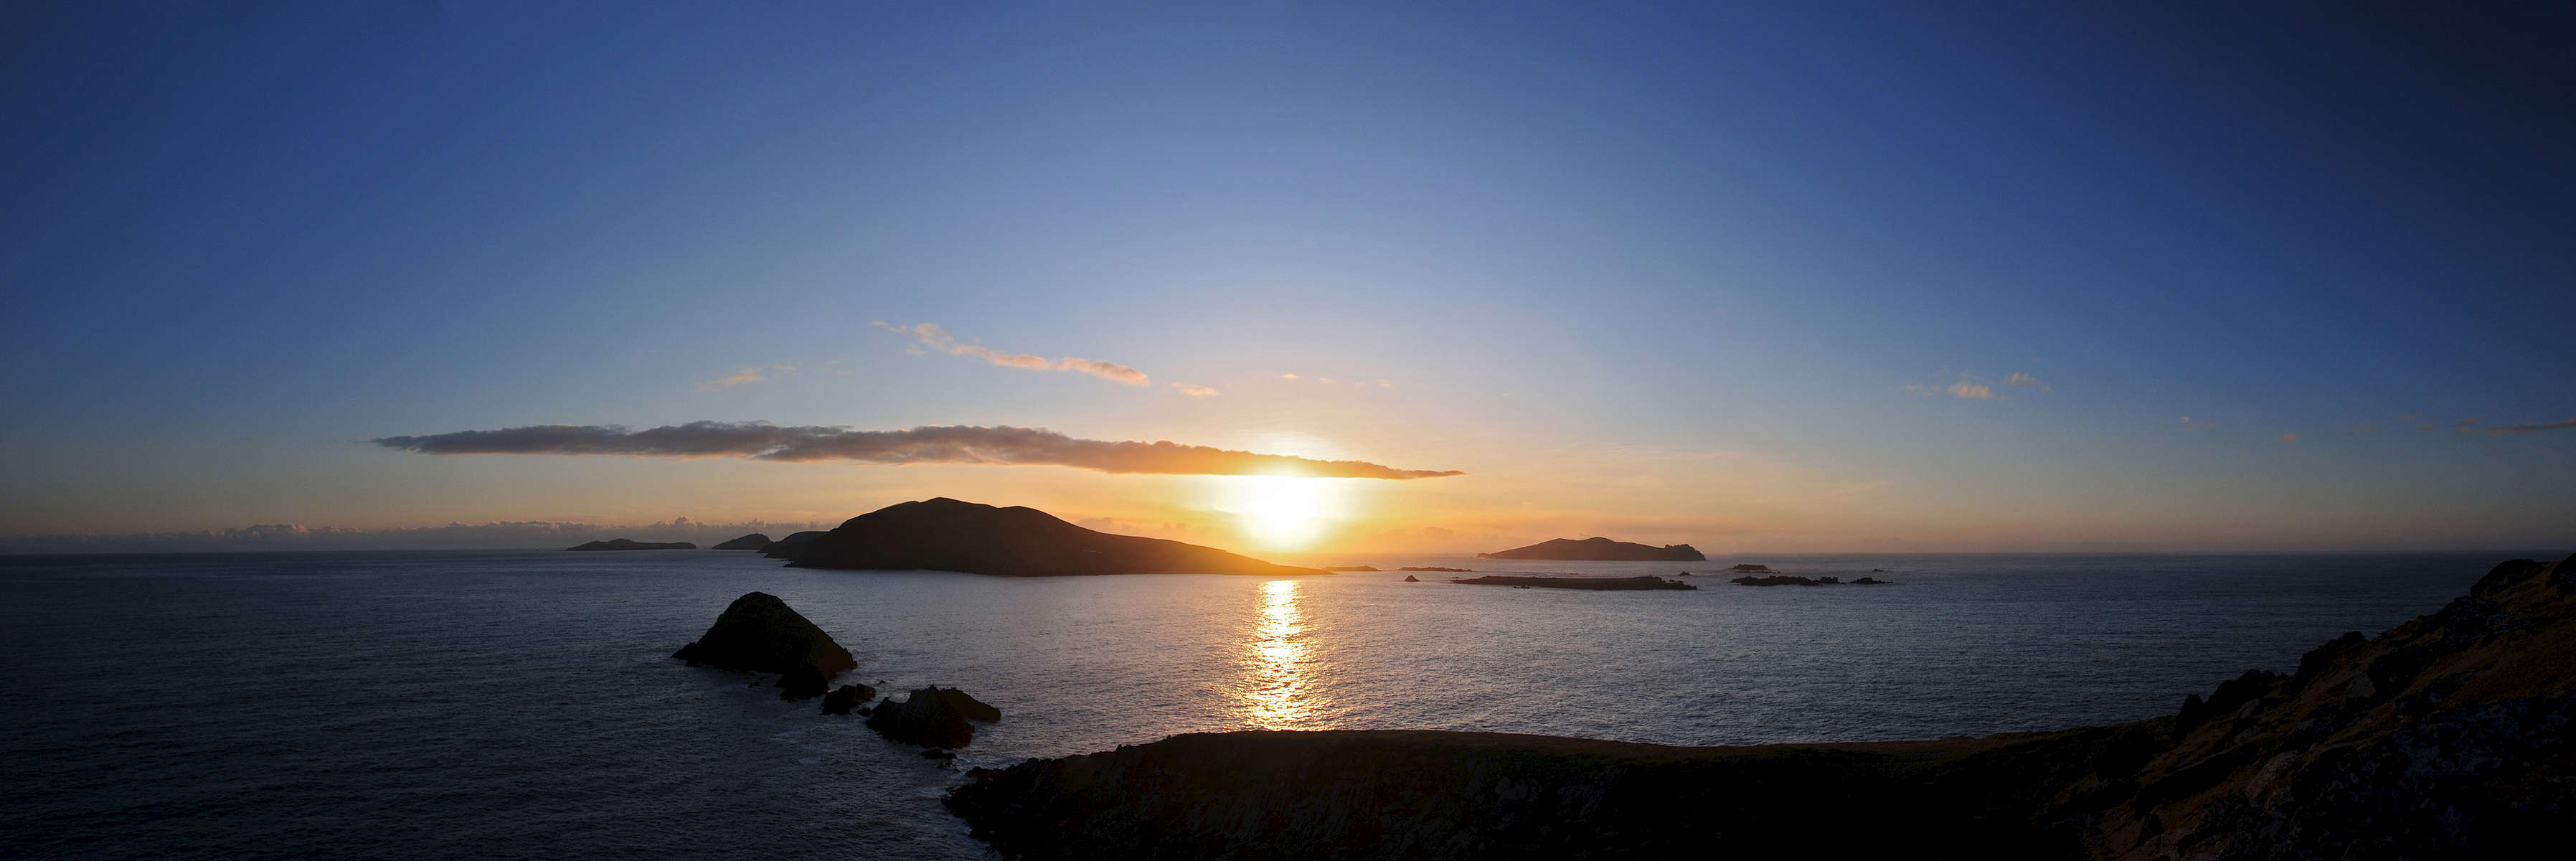 Looking out into he Atlantic past the Blasket Islands from the westernmost tip of Continental Europe.Dingle Penninsula, County Kerry,Republic of IrelandNikon D300, 17-35mm, stitched panorama